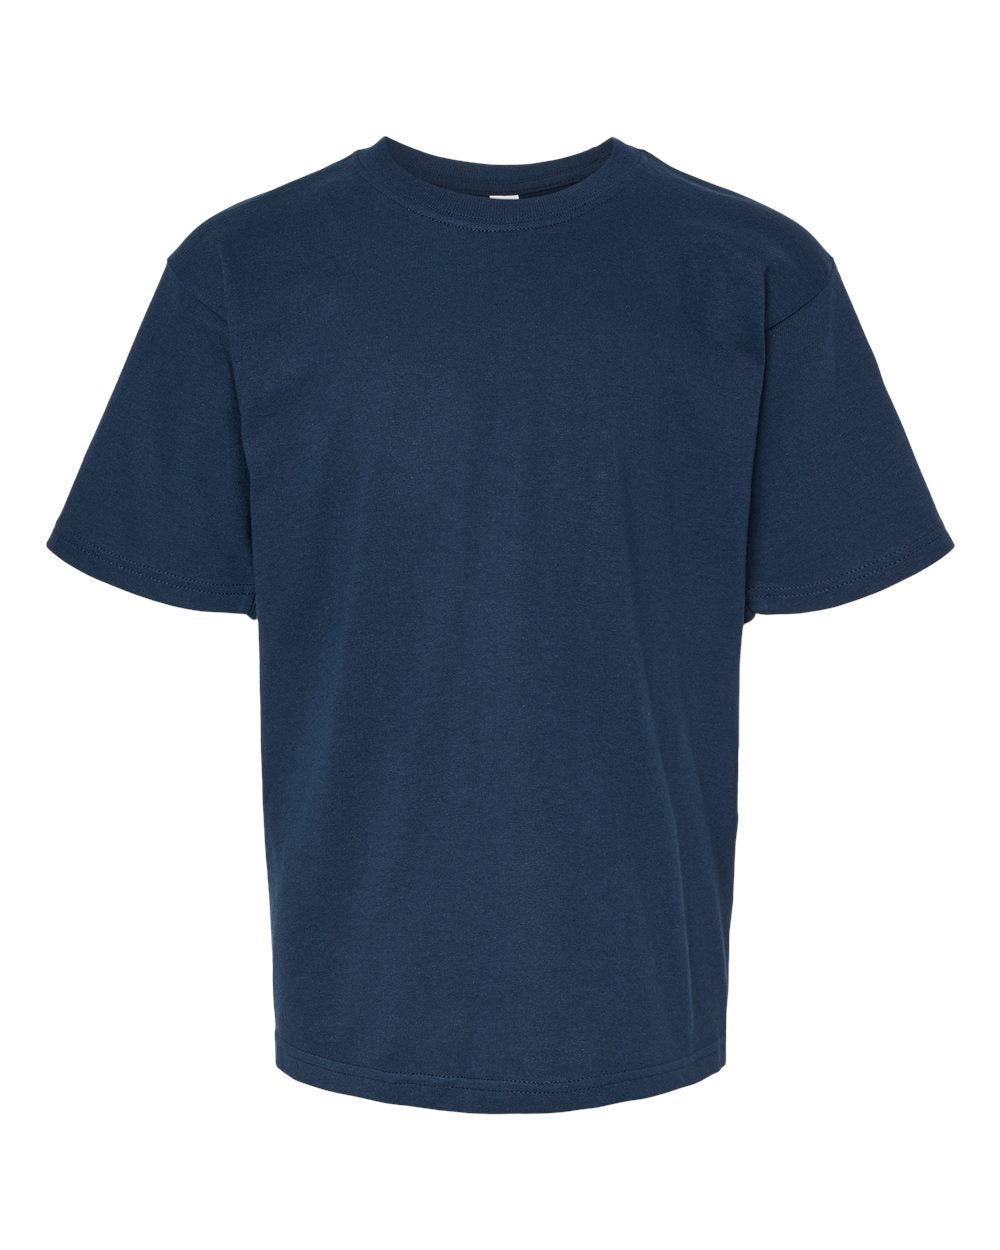 M&O Youth Gold Soft Touch T-Shirt 4850 #color_Deep Navy